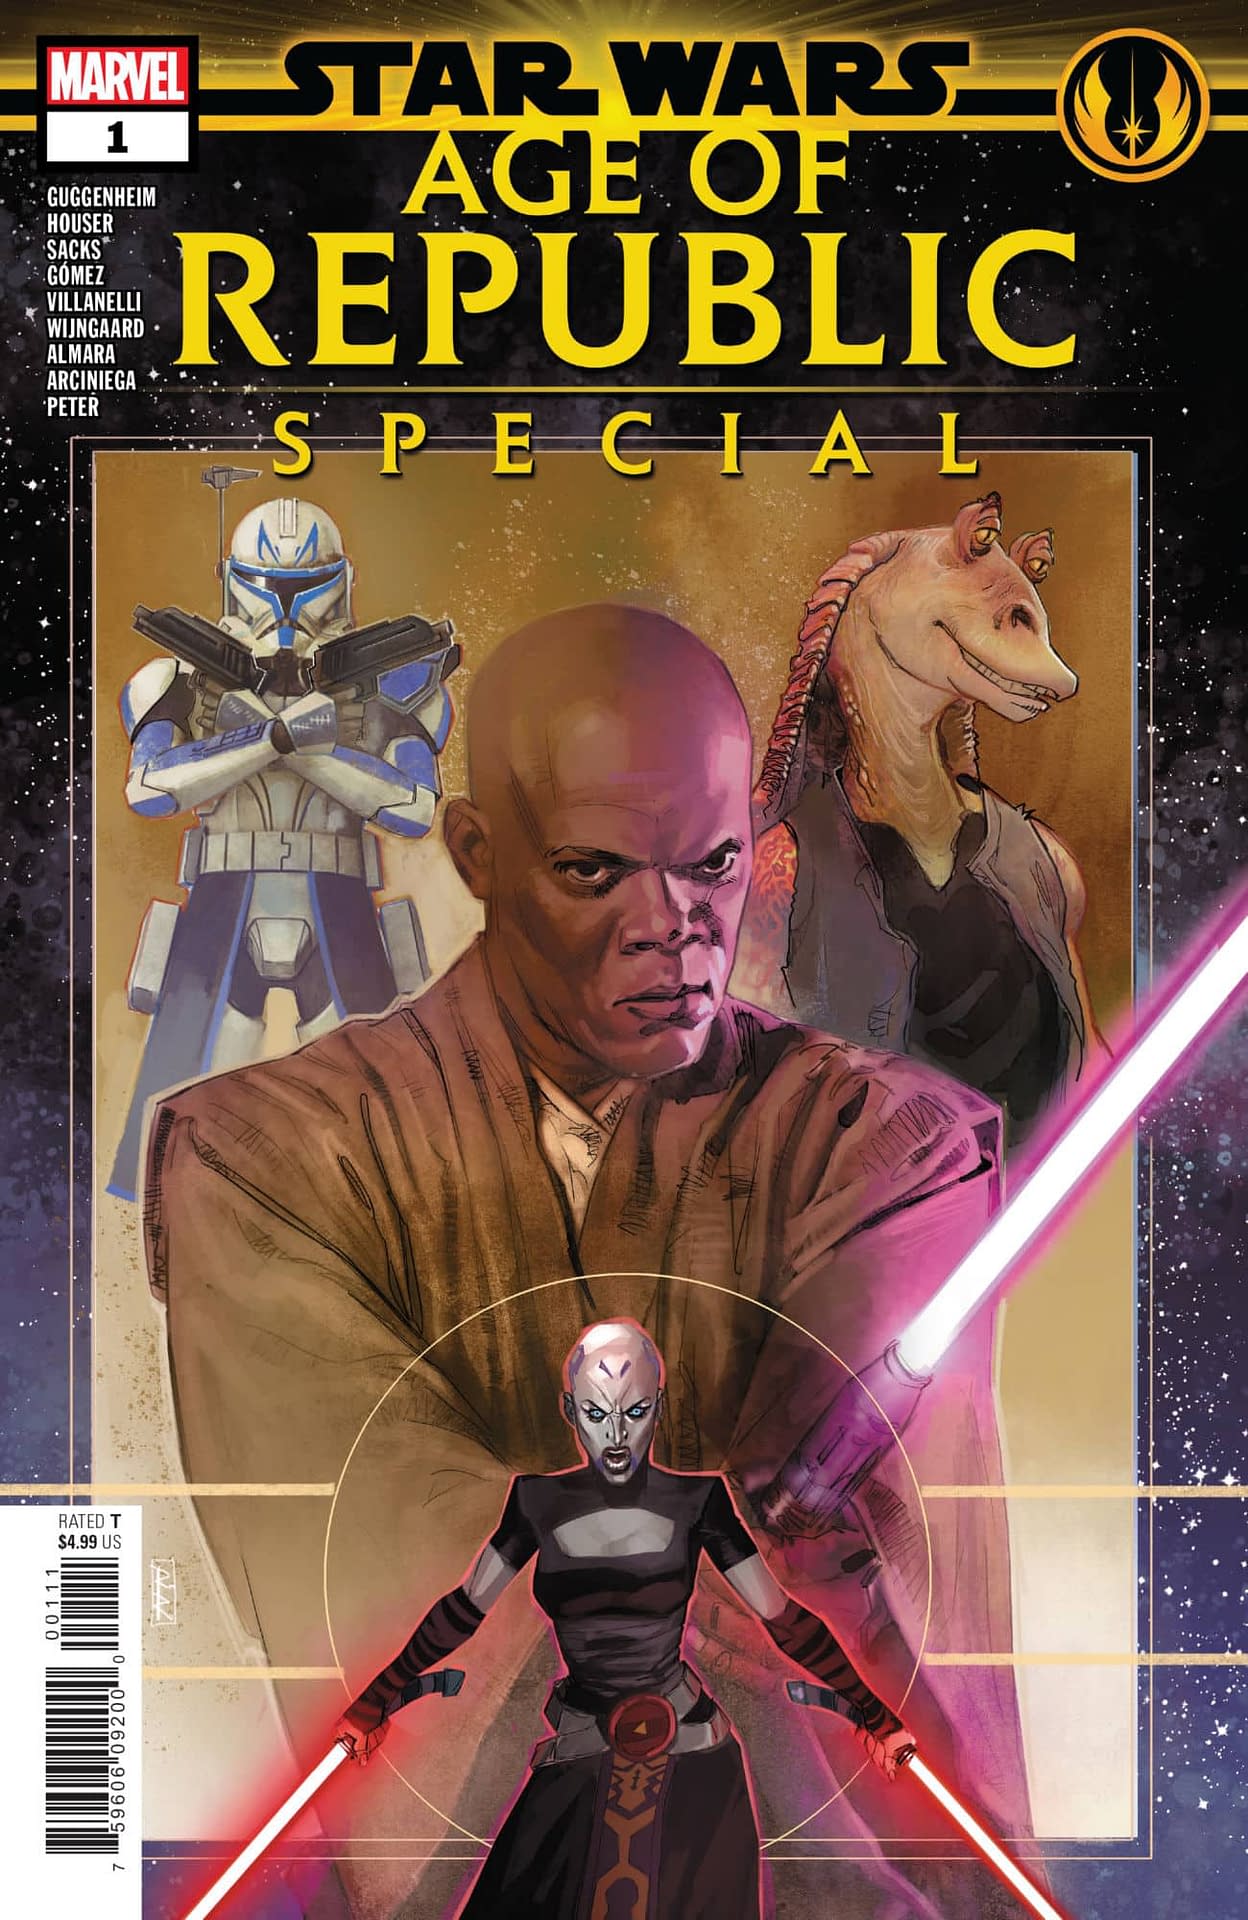 Jar Jar Binks Does Not Appear in This Preview of Next Week's Star Wars Age of Republic Special